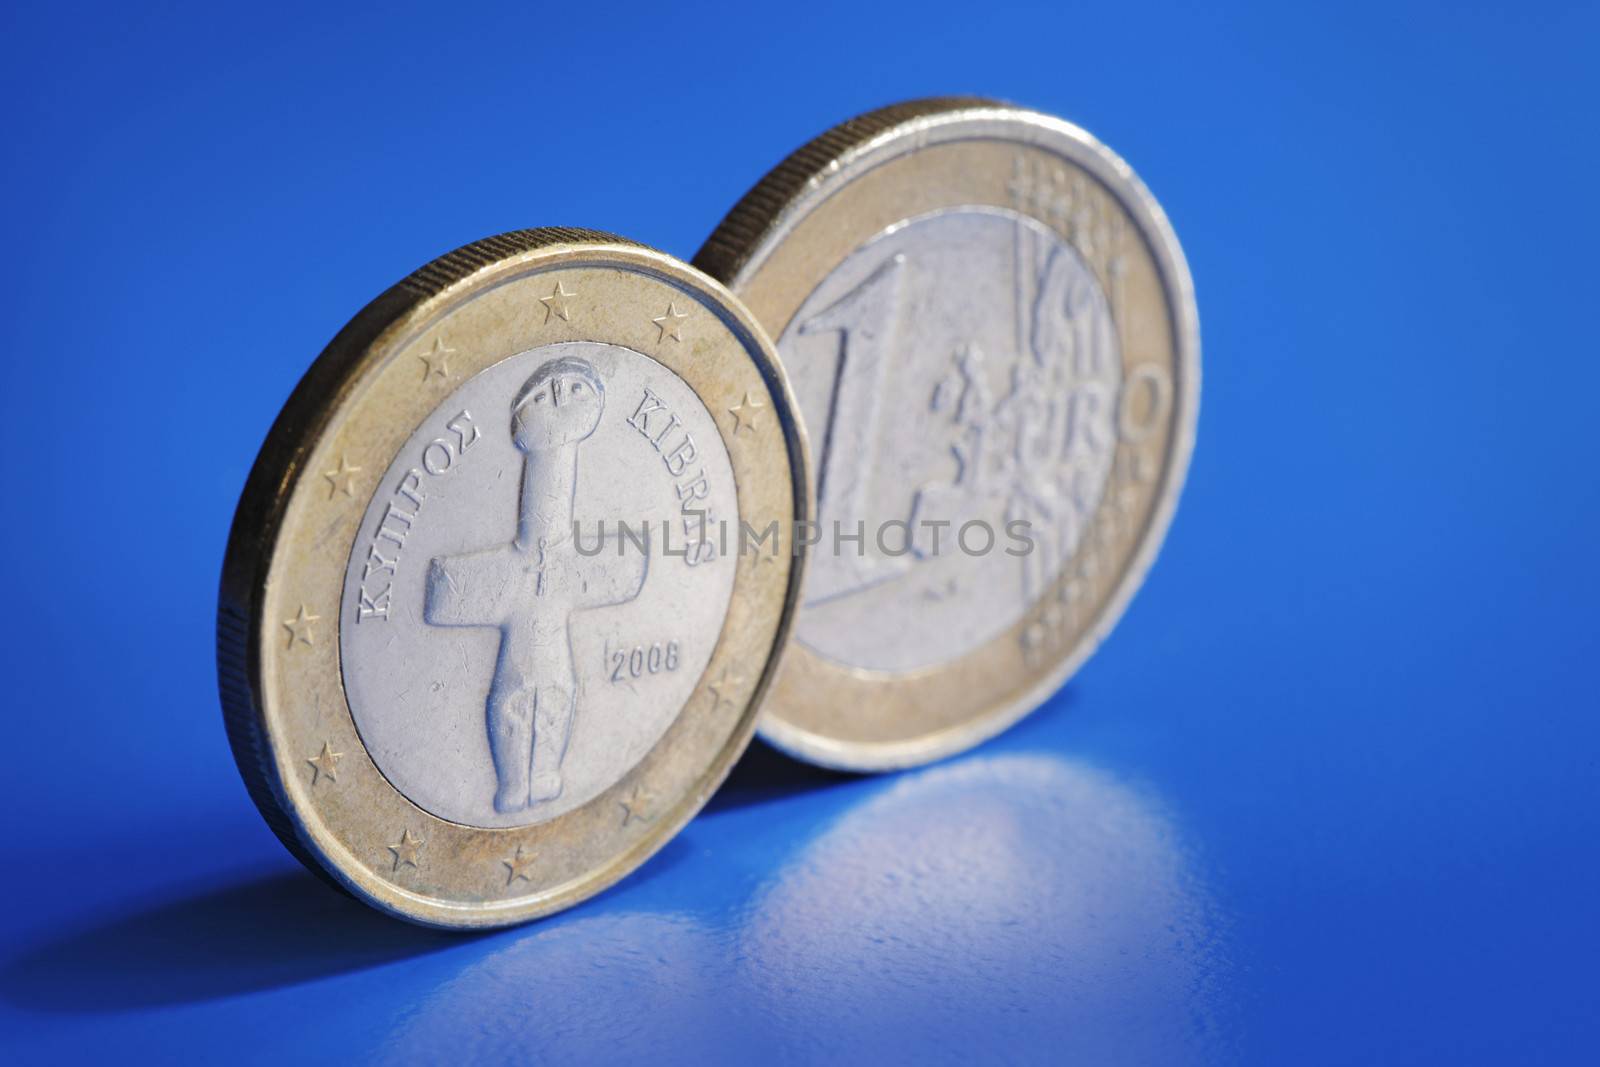 Euro coins from Cyprus on blue background.